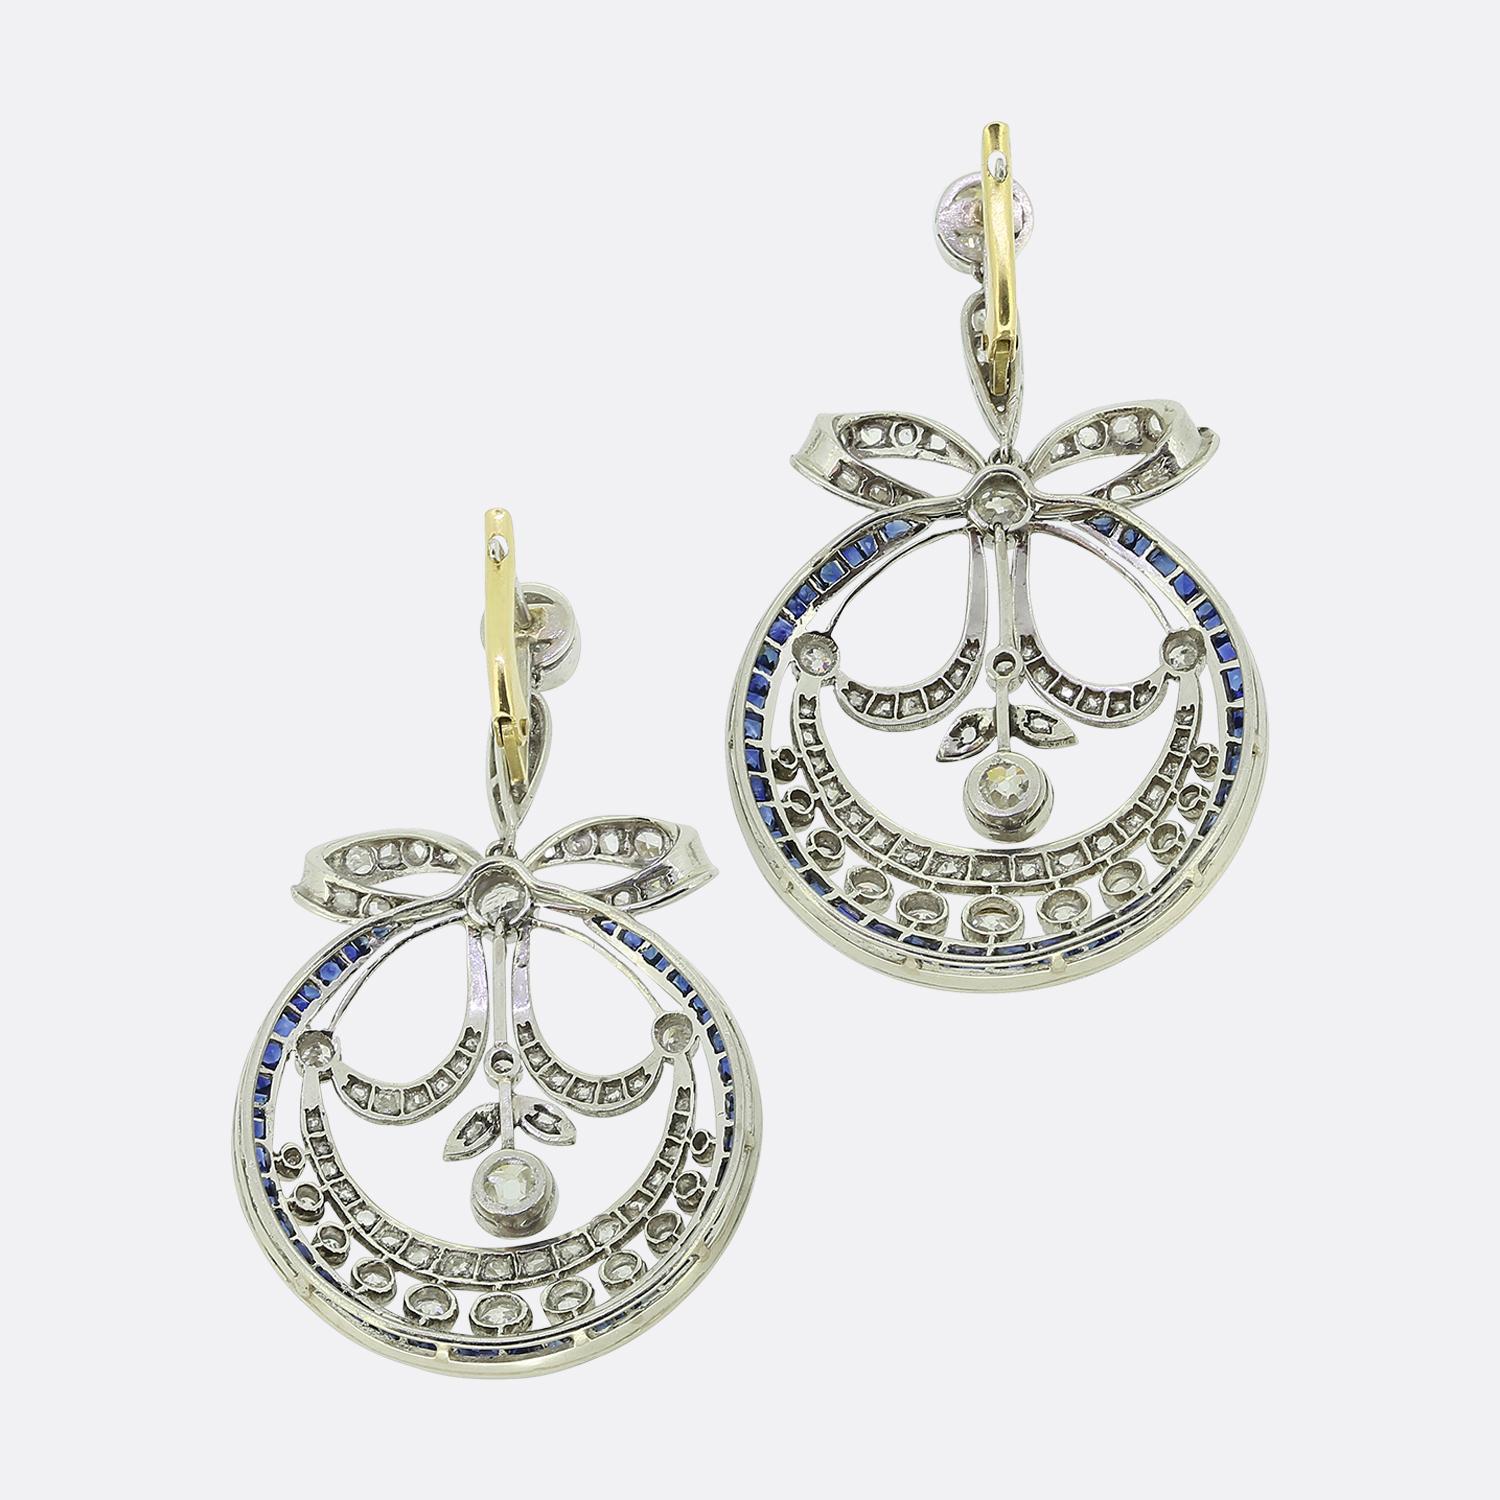 Here we have an outstanding pair of drop earrings excellently crafted from 18ct gold in a typical Art Deco style. A rose cut diamond set bow motif surmounts an open circular frame below consisting of old and rose cut diamonds before a single row of